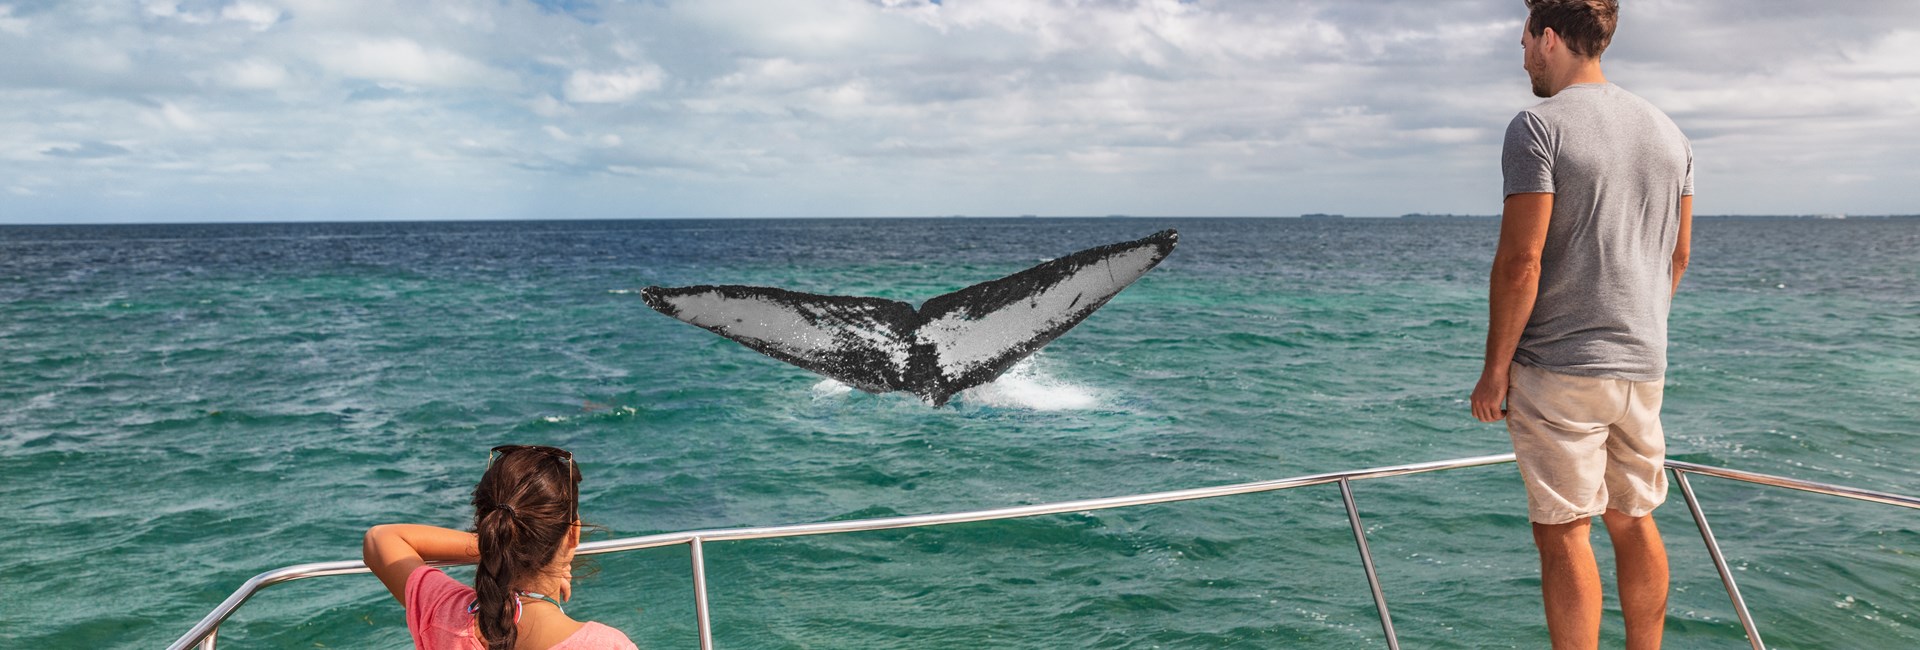 Couple on a boat watching humpback whales in the Dominican Republic